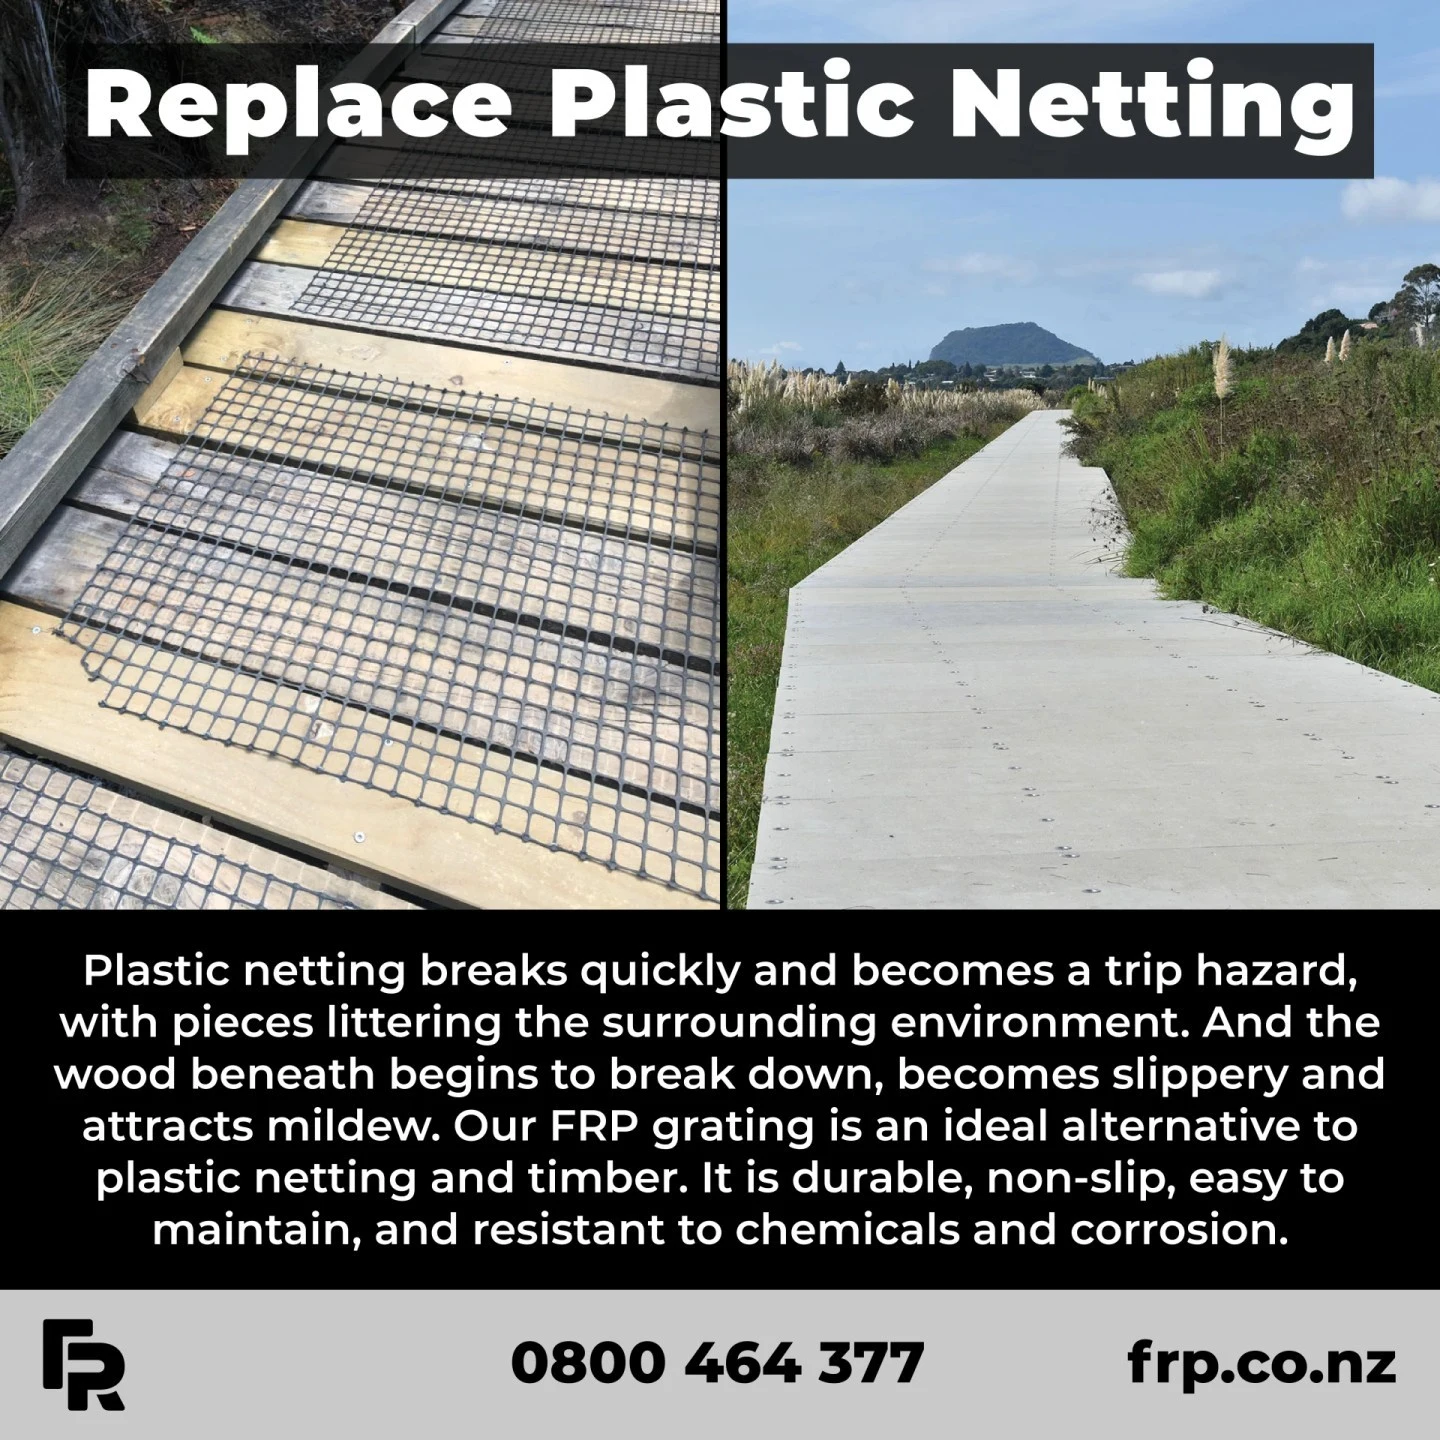 Let us know how we can help!

#frp #frpproducts #walkways #boardwalks #nzarchitects #councils #cycleways #nzconstruction